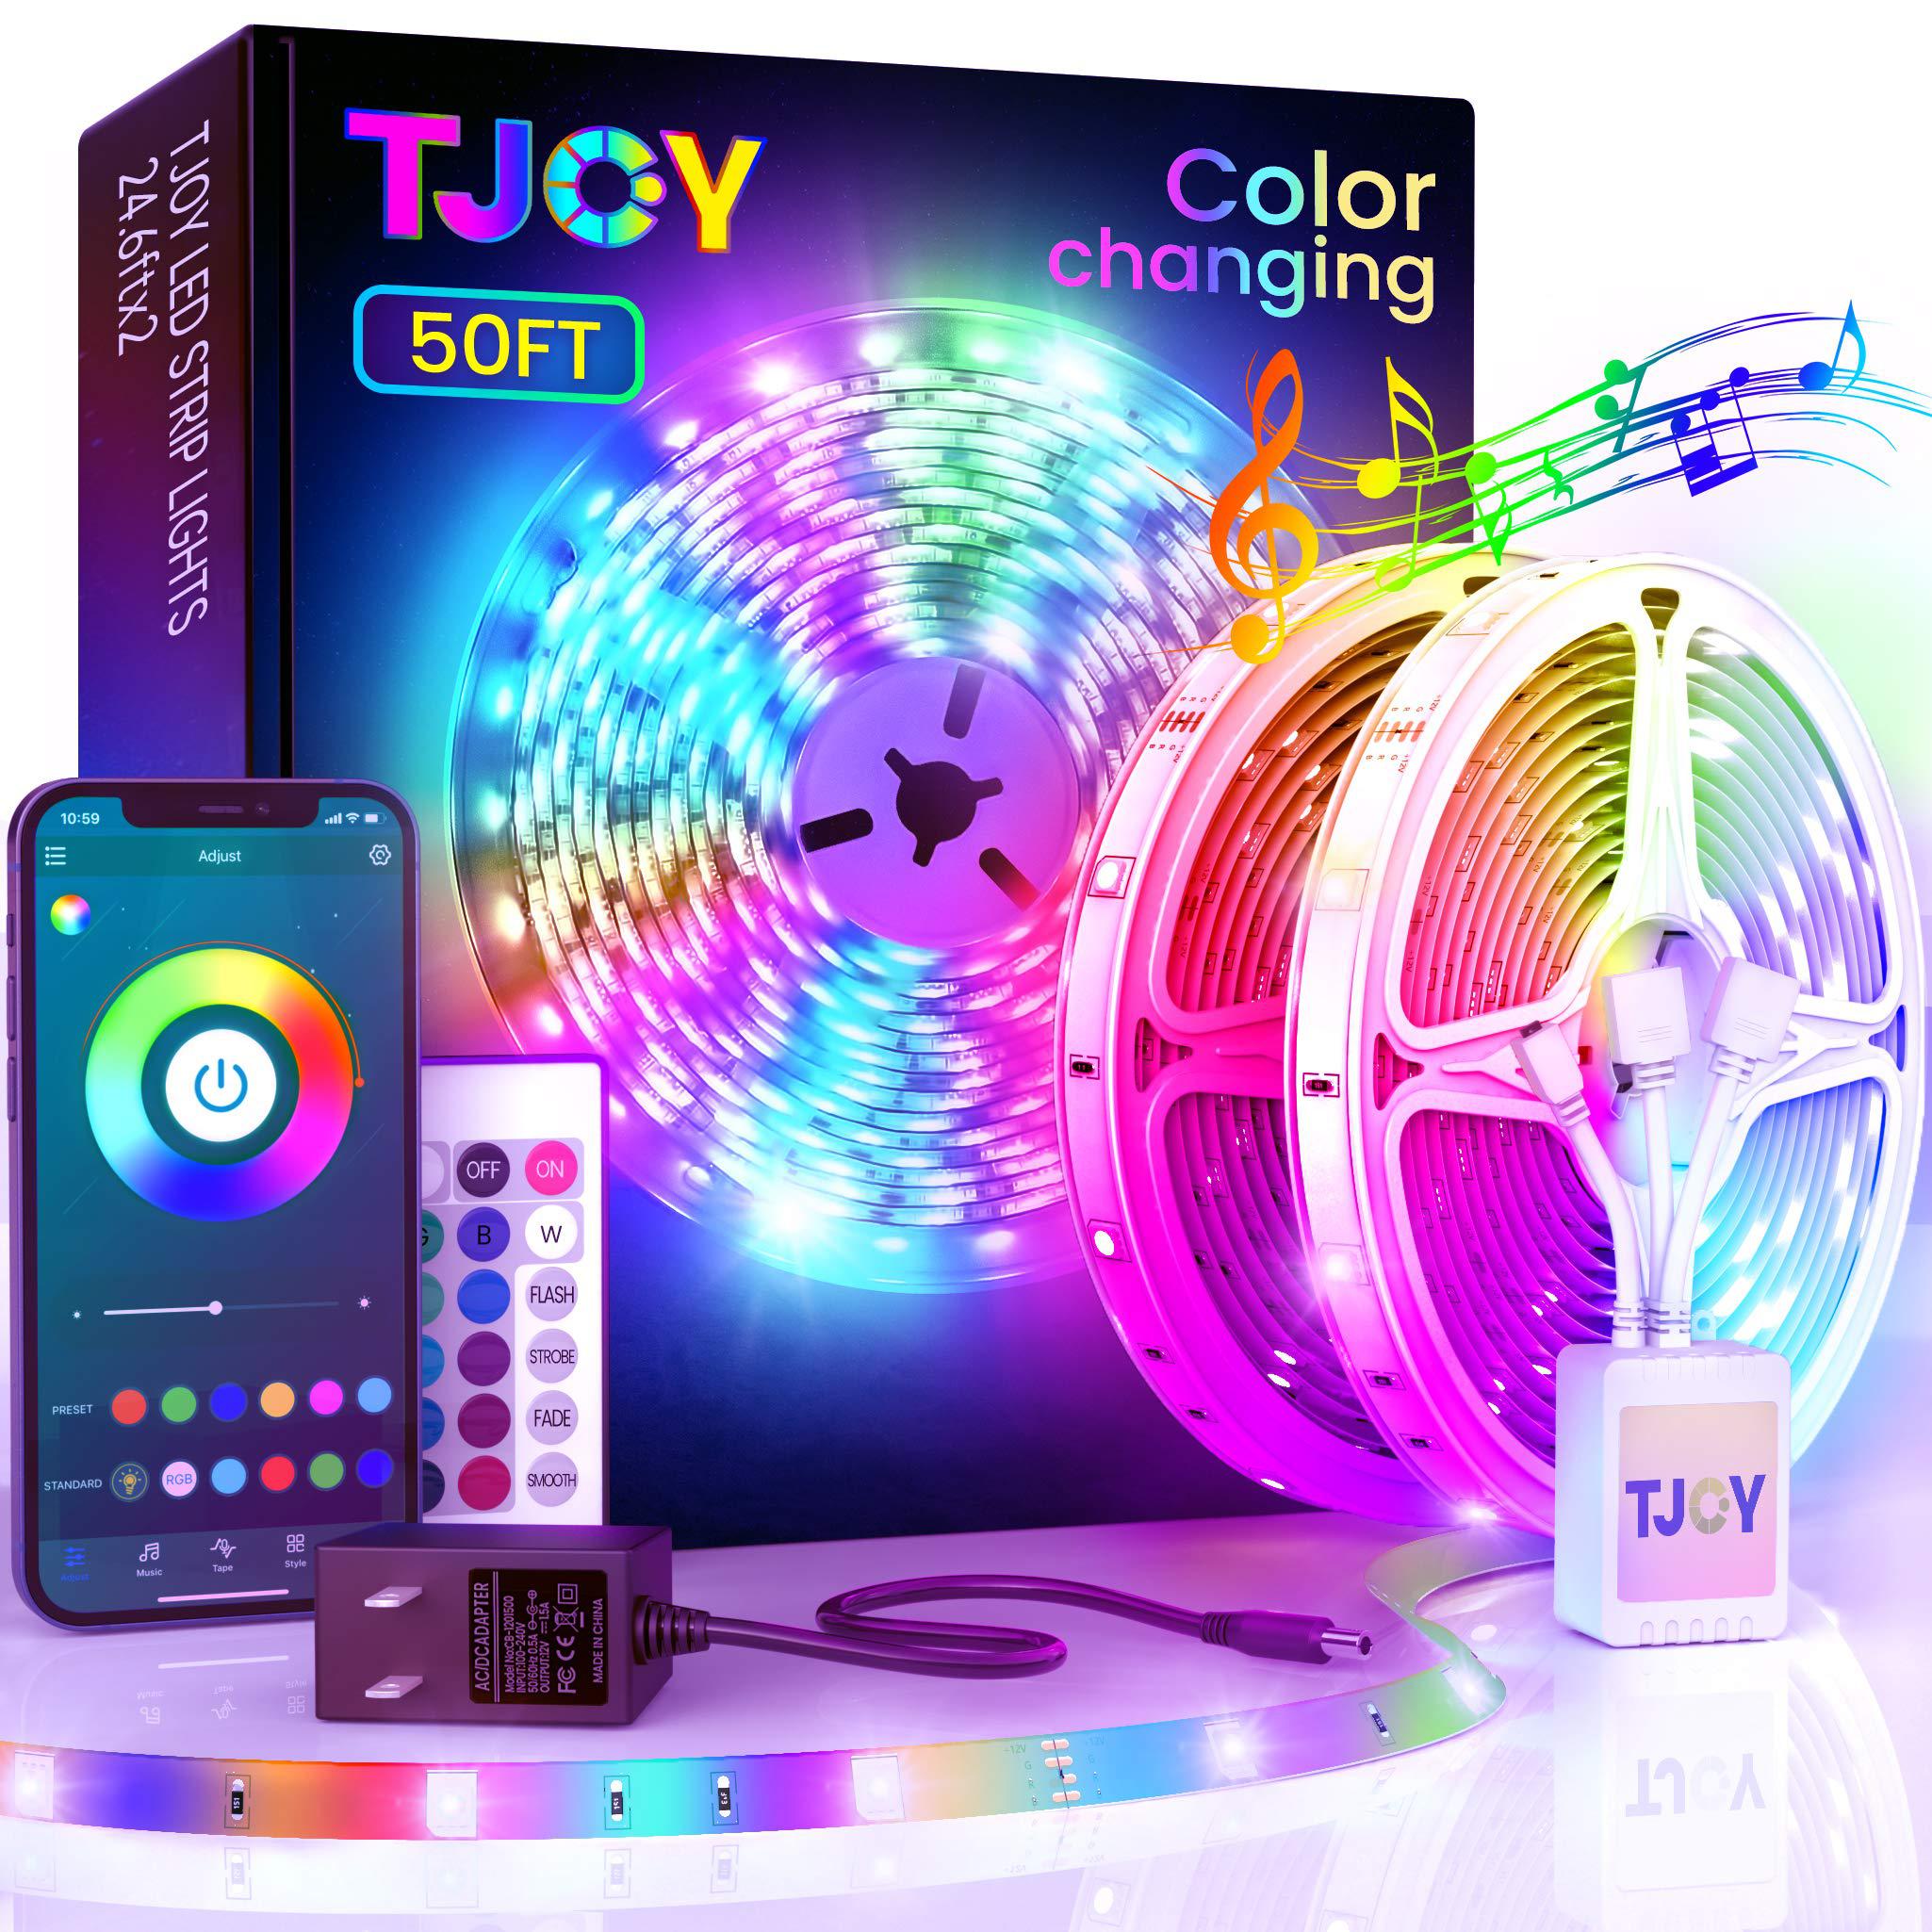 tjoy 50ft bluetooth led strip lights, music sync 5050 led light strip rgb color changing led lights strip with phone remote, 